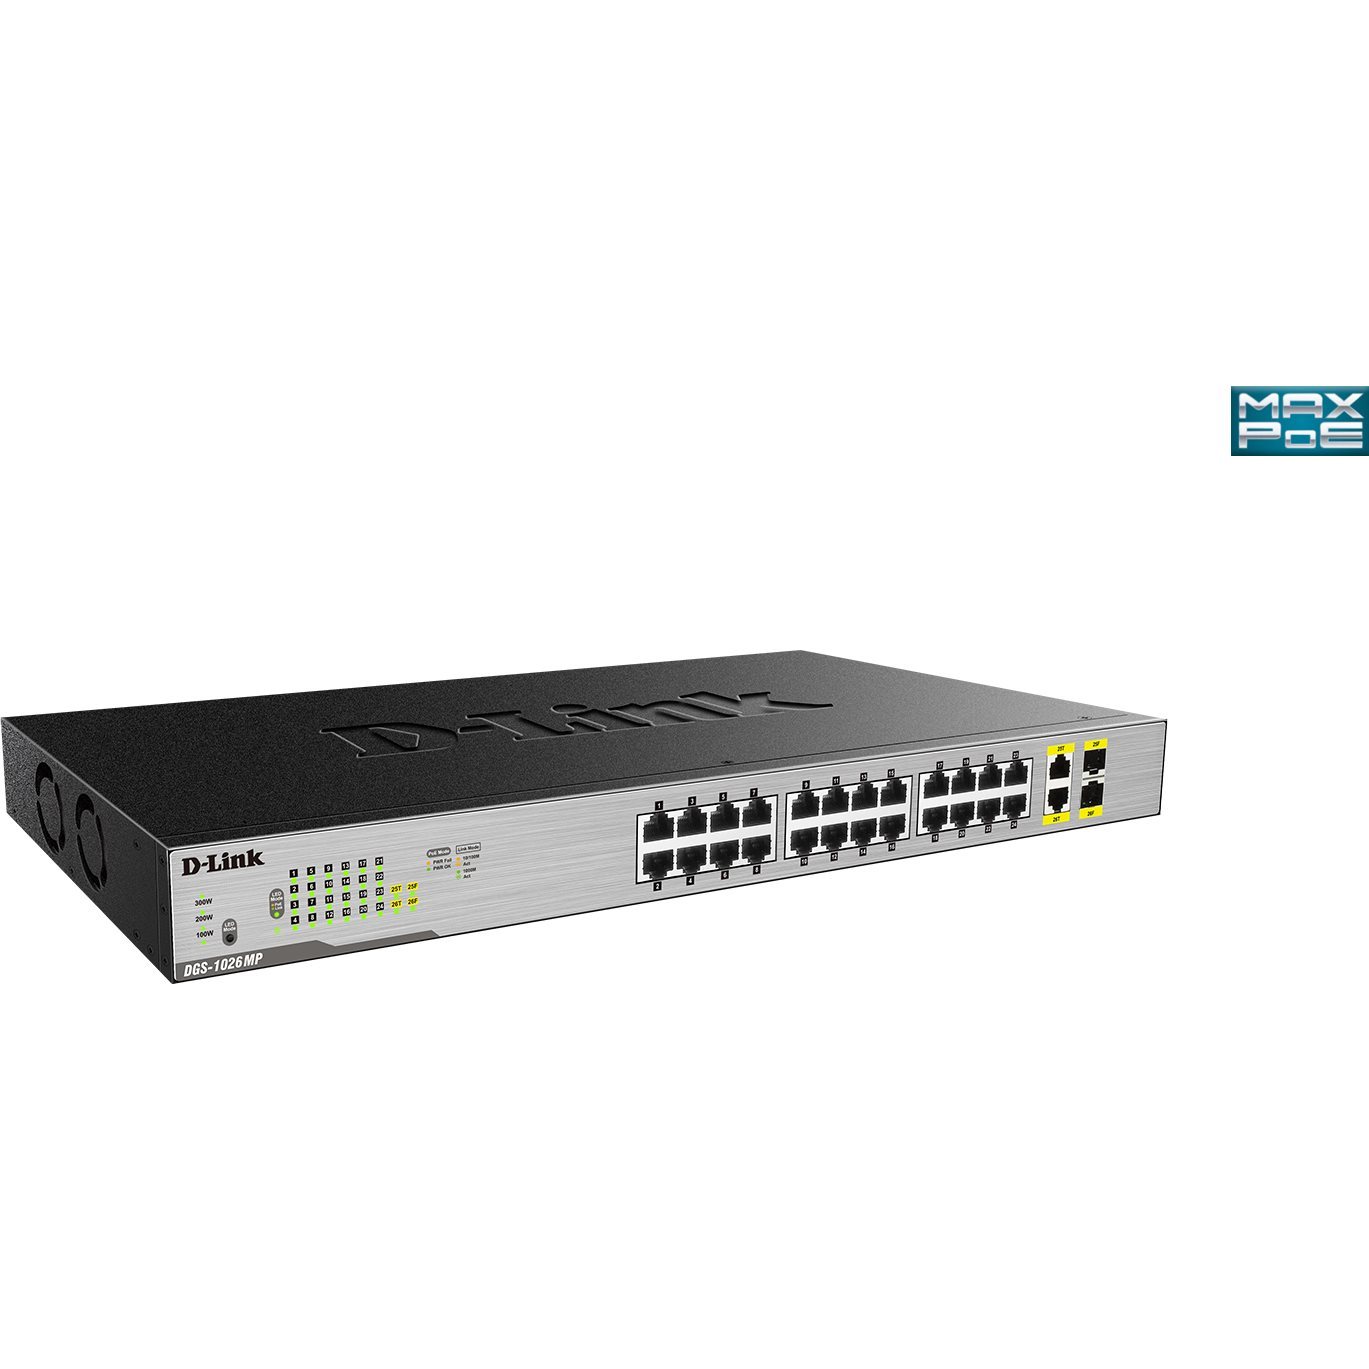   Switch   Switch 24 Ports Giga PoE at 370W + 2 Combo SFP DGS-1026MP